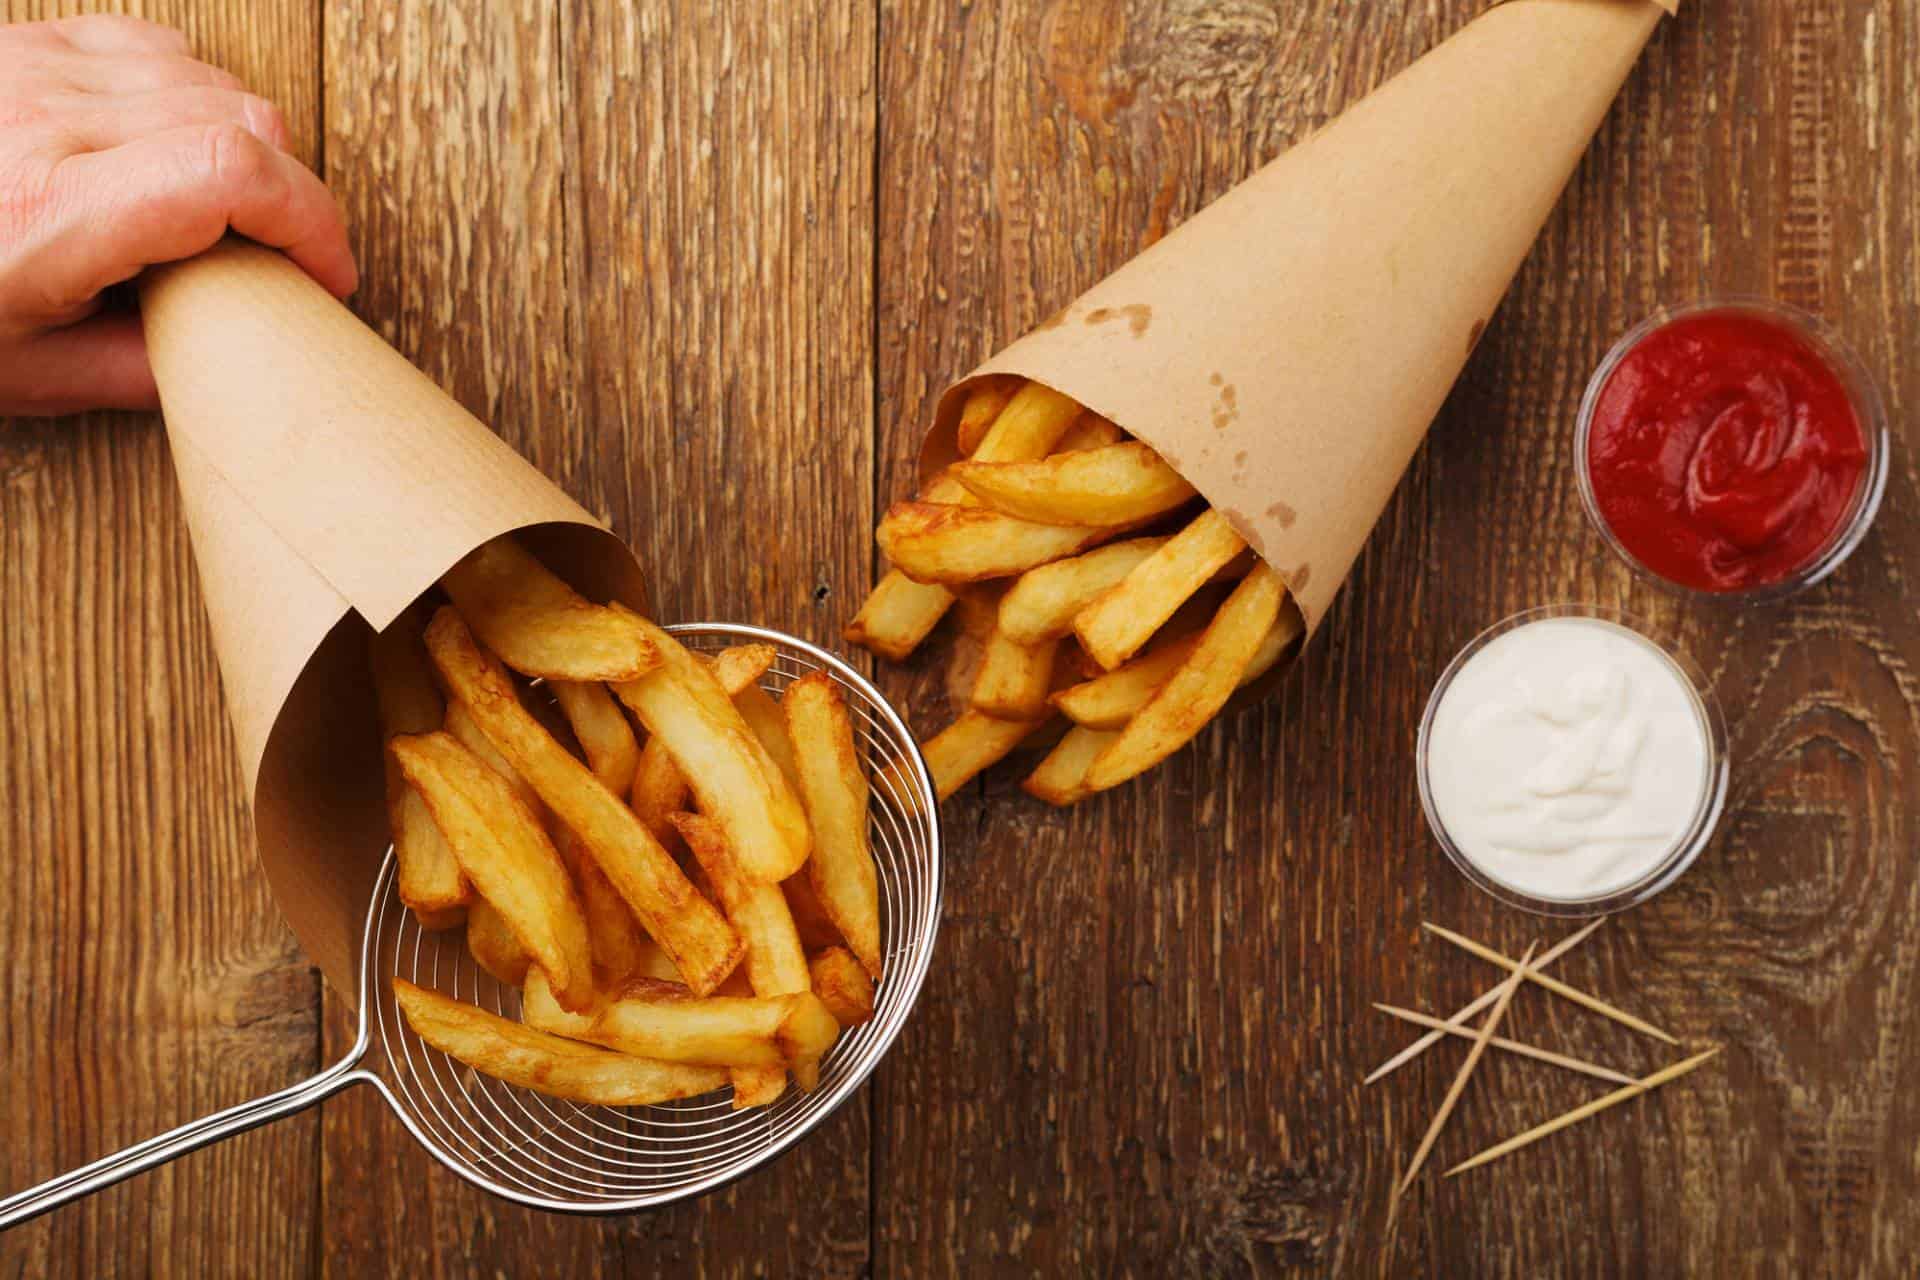 Who invented French Fries?